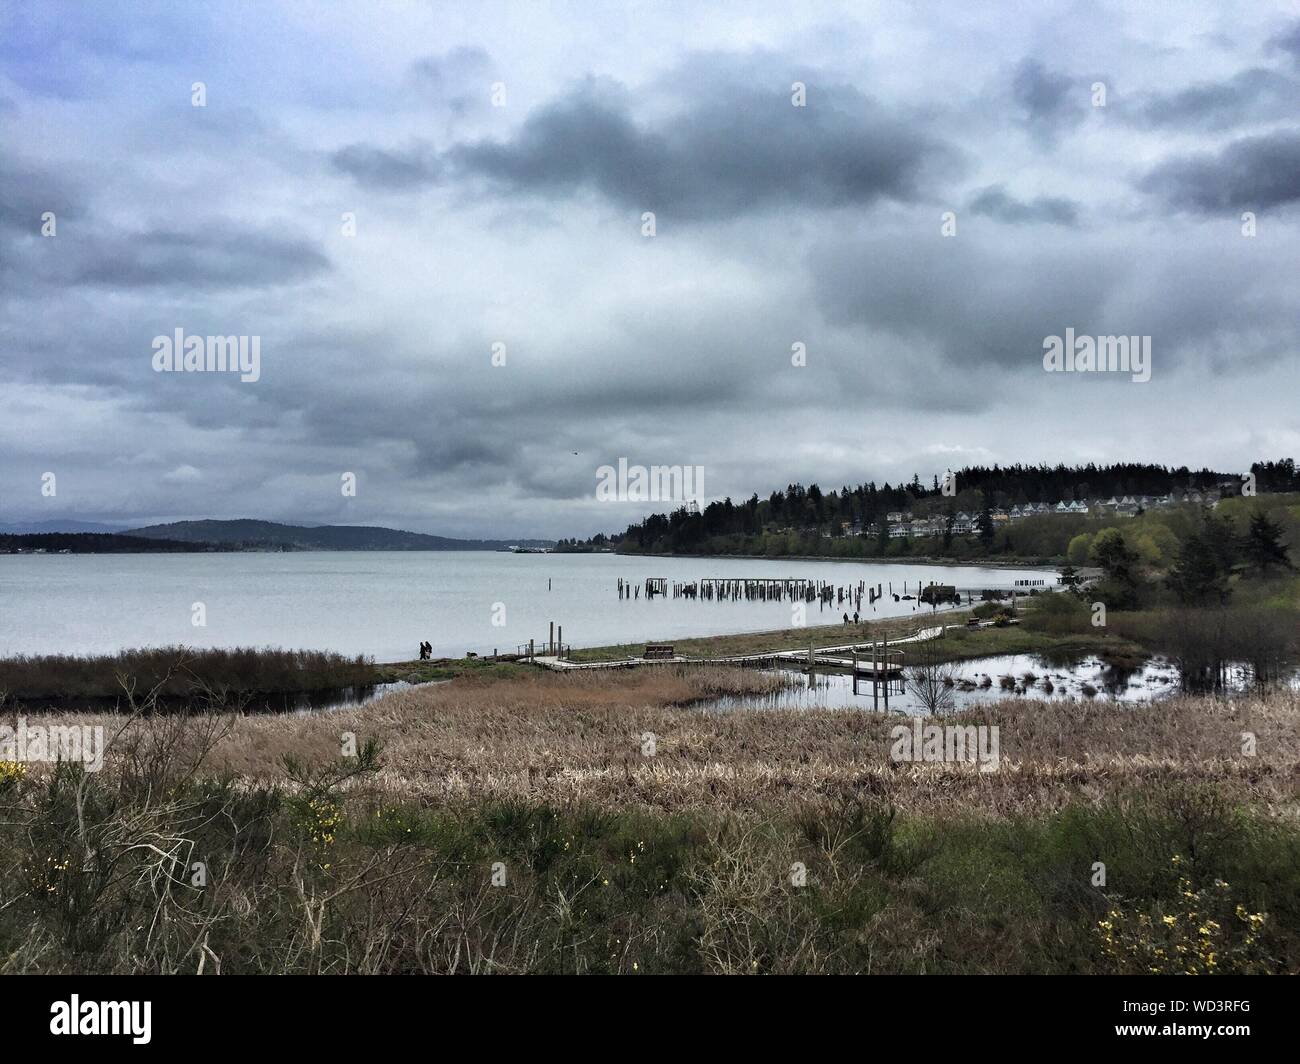 Scenic View Of Calm Lake Against Cloudy Sky Stock Photo